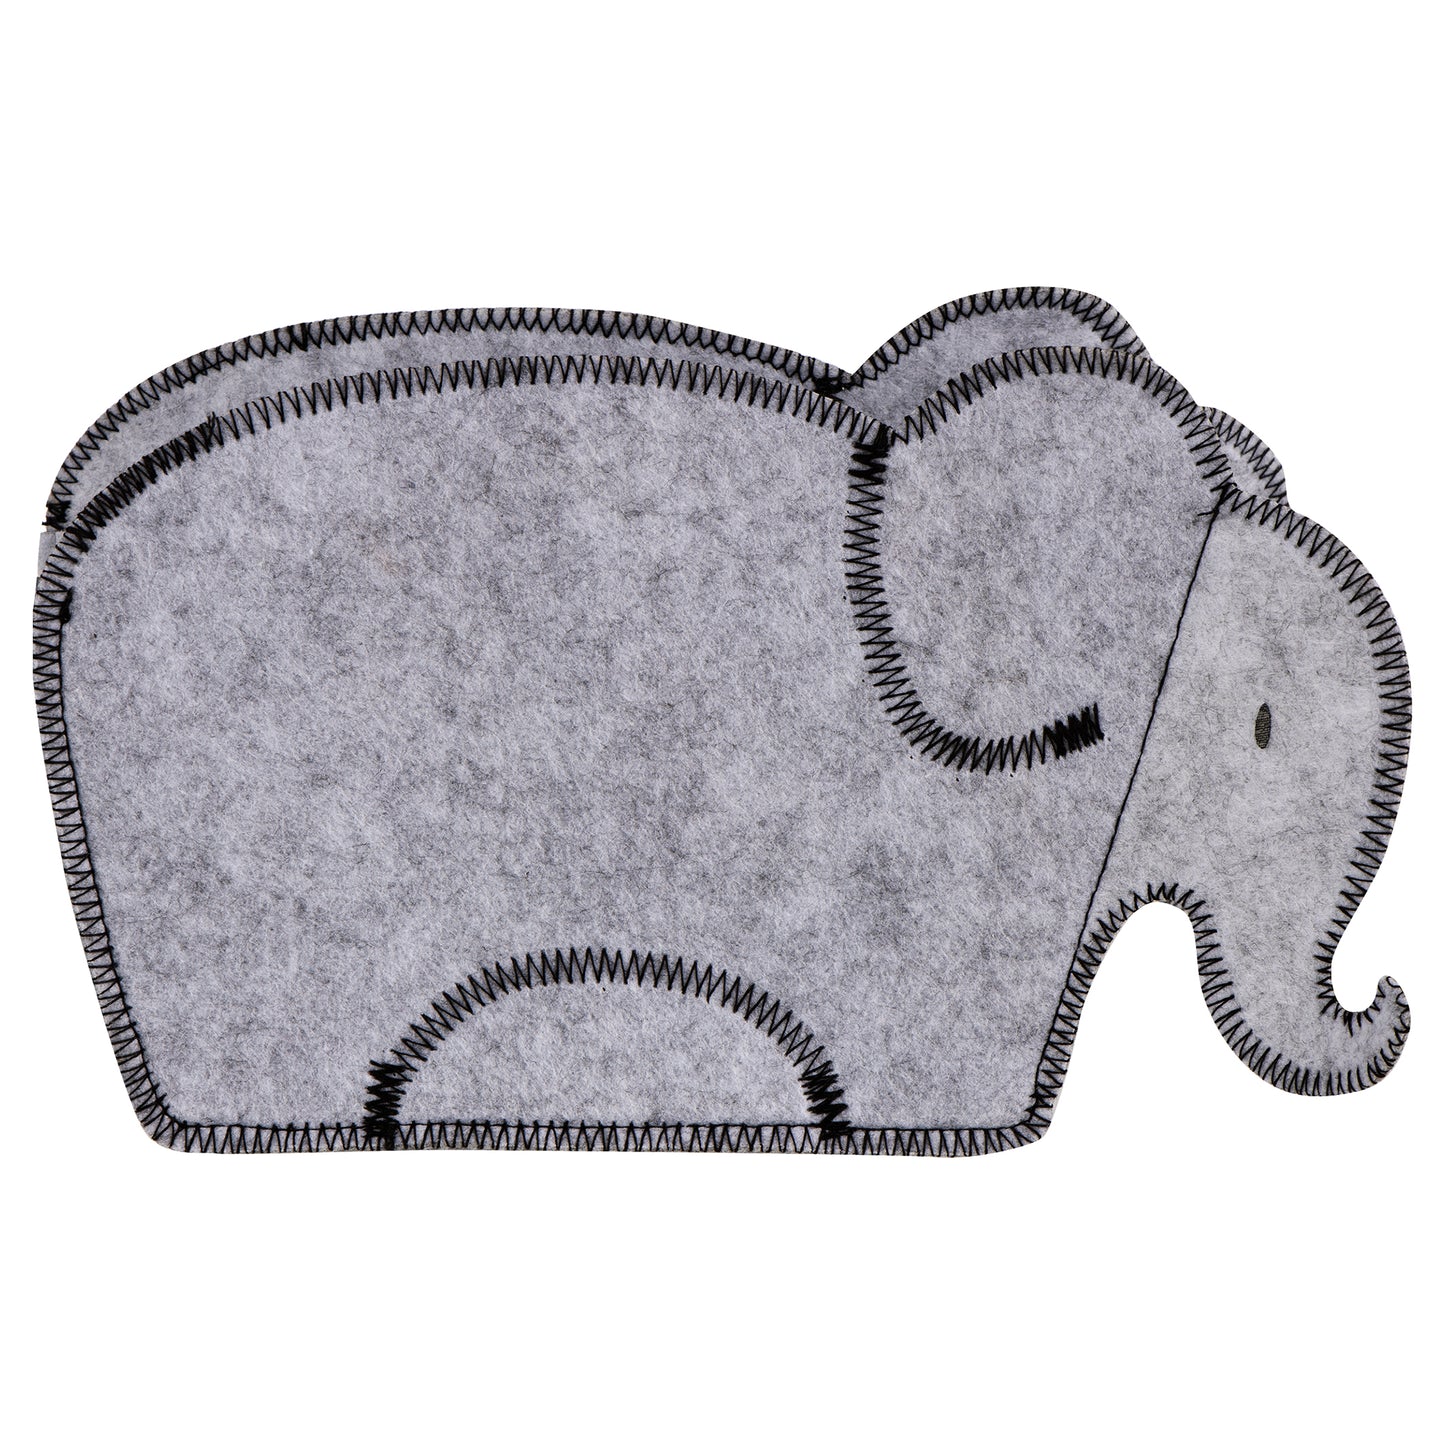 Welcome Baby Elephant Shaped 5 Piece Gift Set by My Tiny Moments®